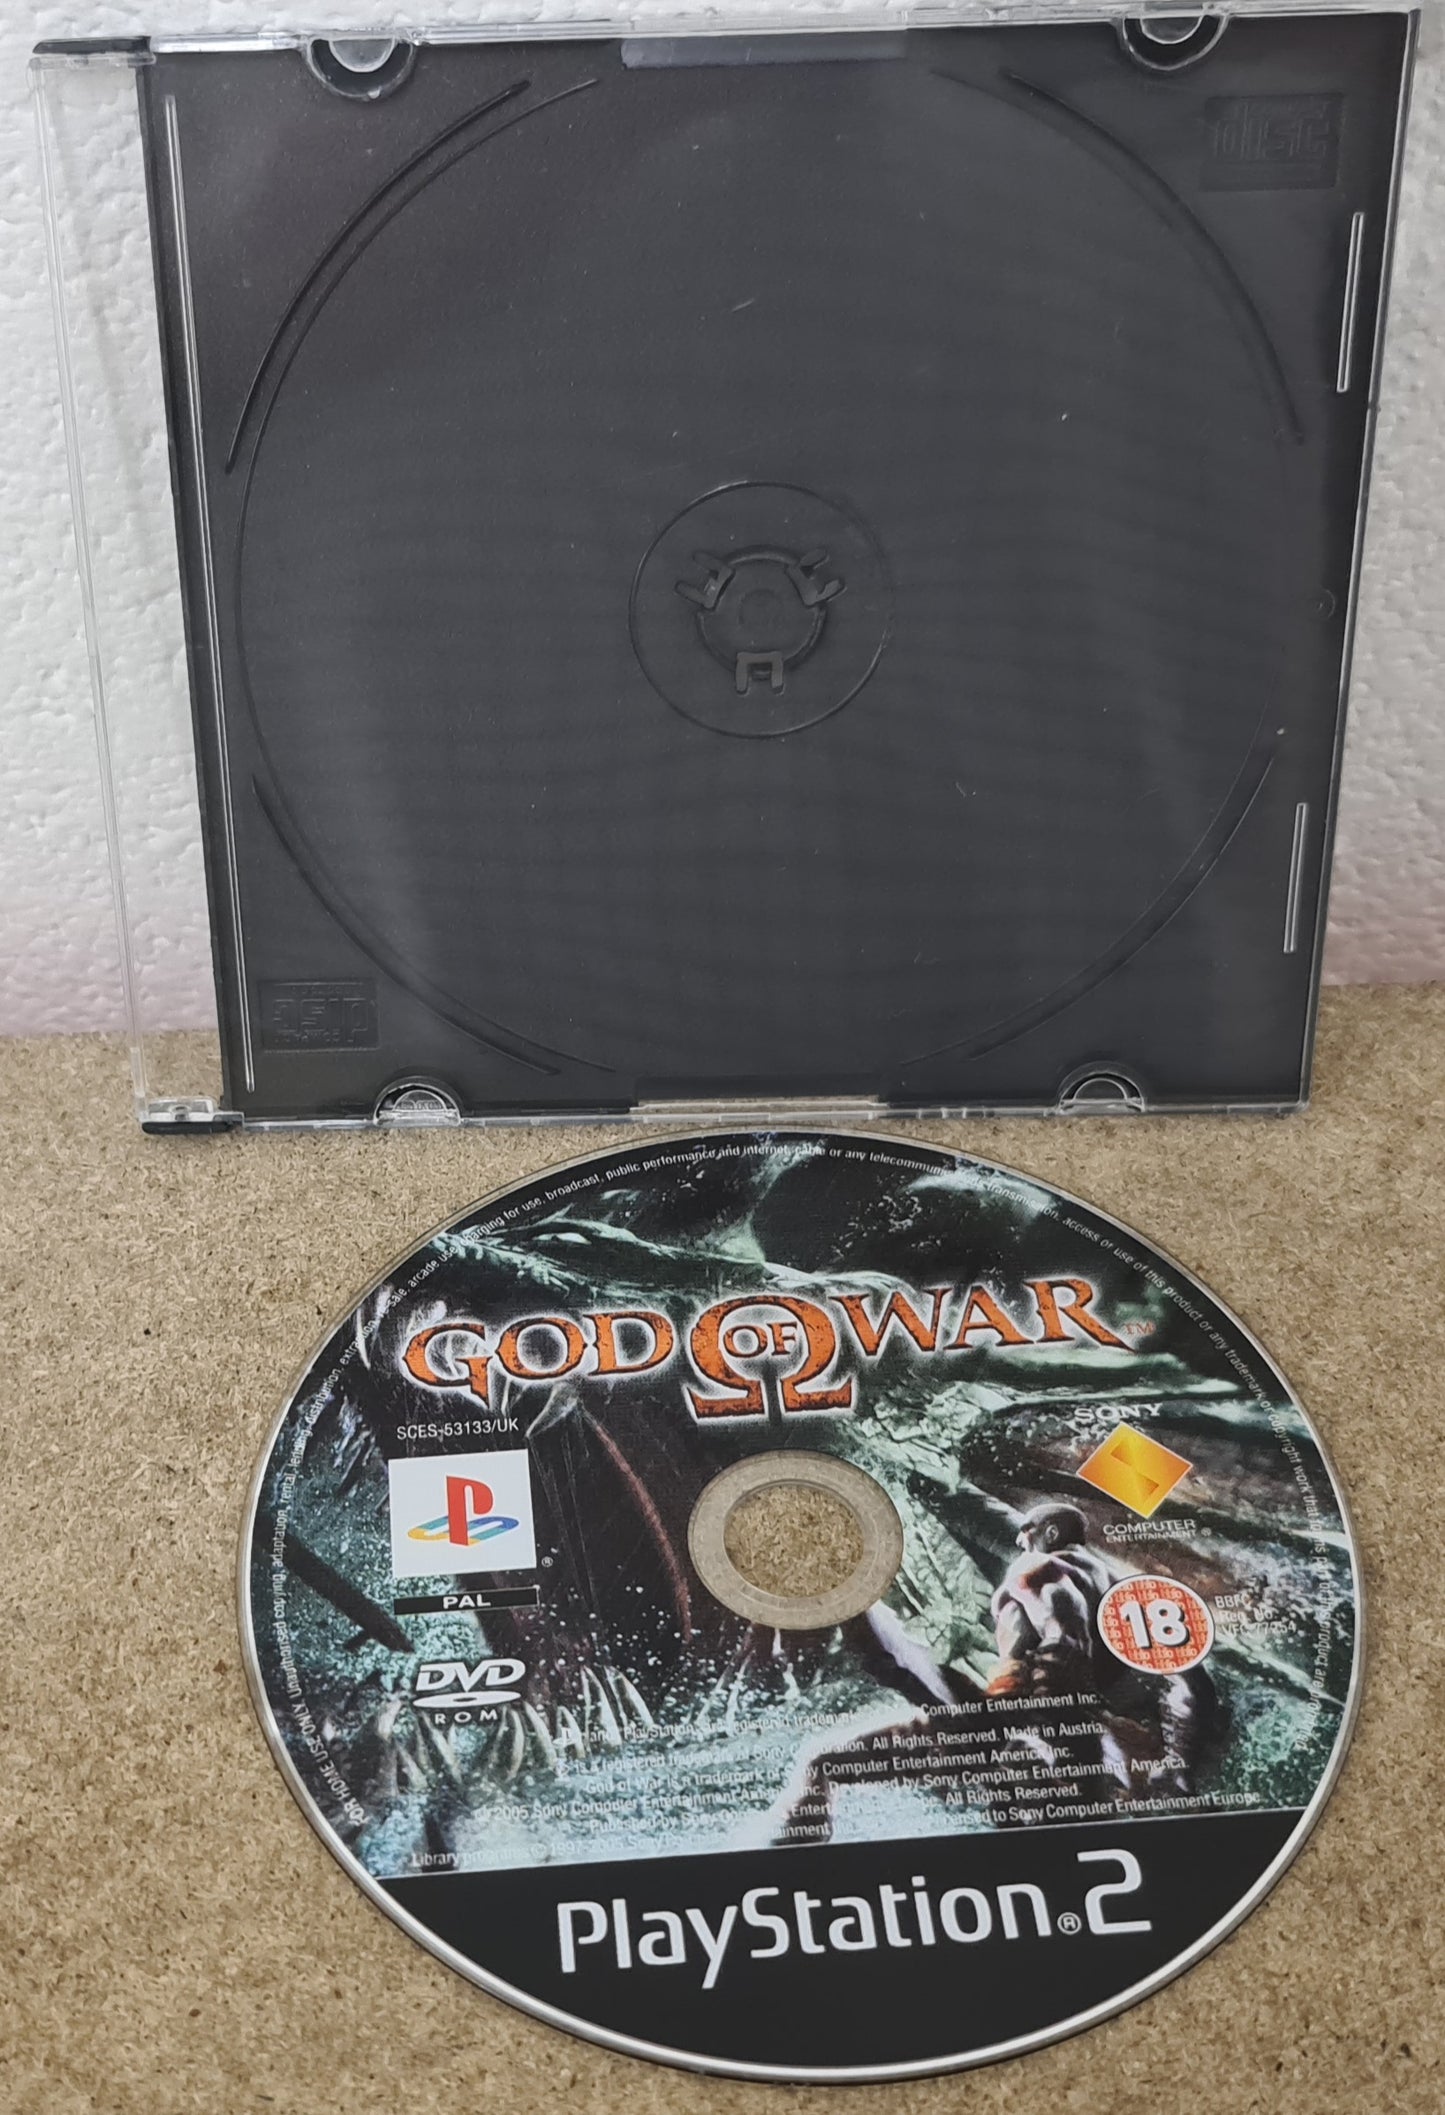 God of War Sony Playstation 2 (PS2) Game Disc Only